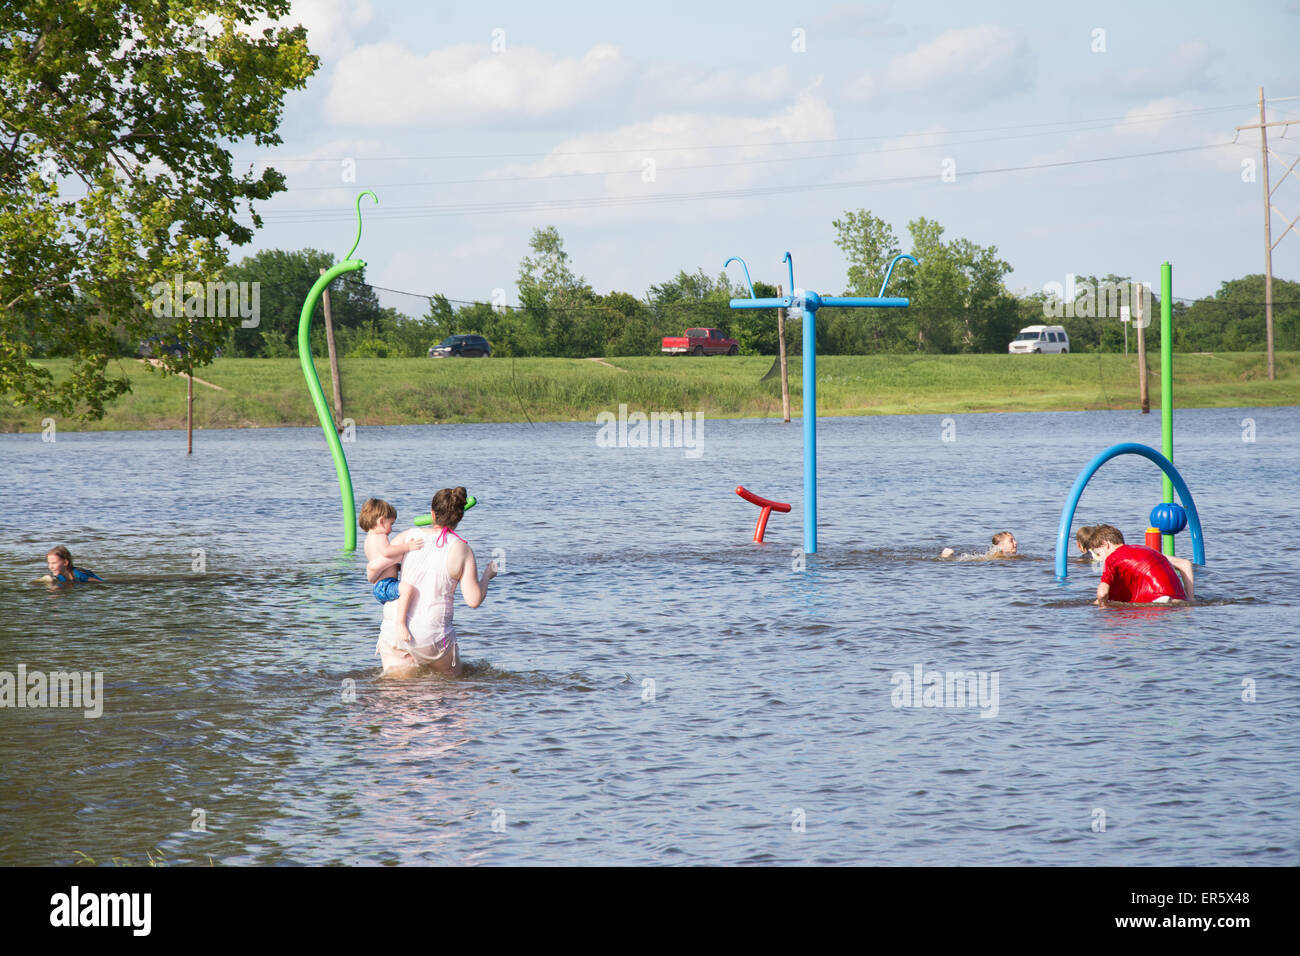 Mannford, Oklahoma, USA. 27th May, 2015. Children are playing on public playground inundated with flood waters in Mannford, Oklahoma on Wednesday 27th May, 2015. Oklahoma has experienced record breaking rains in May, leading to wide-spread flooding. Credit:  Sari O'Neal/Alamy Live News Stock Photo